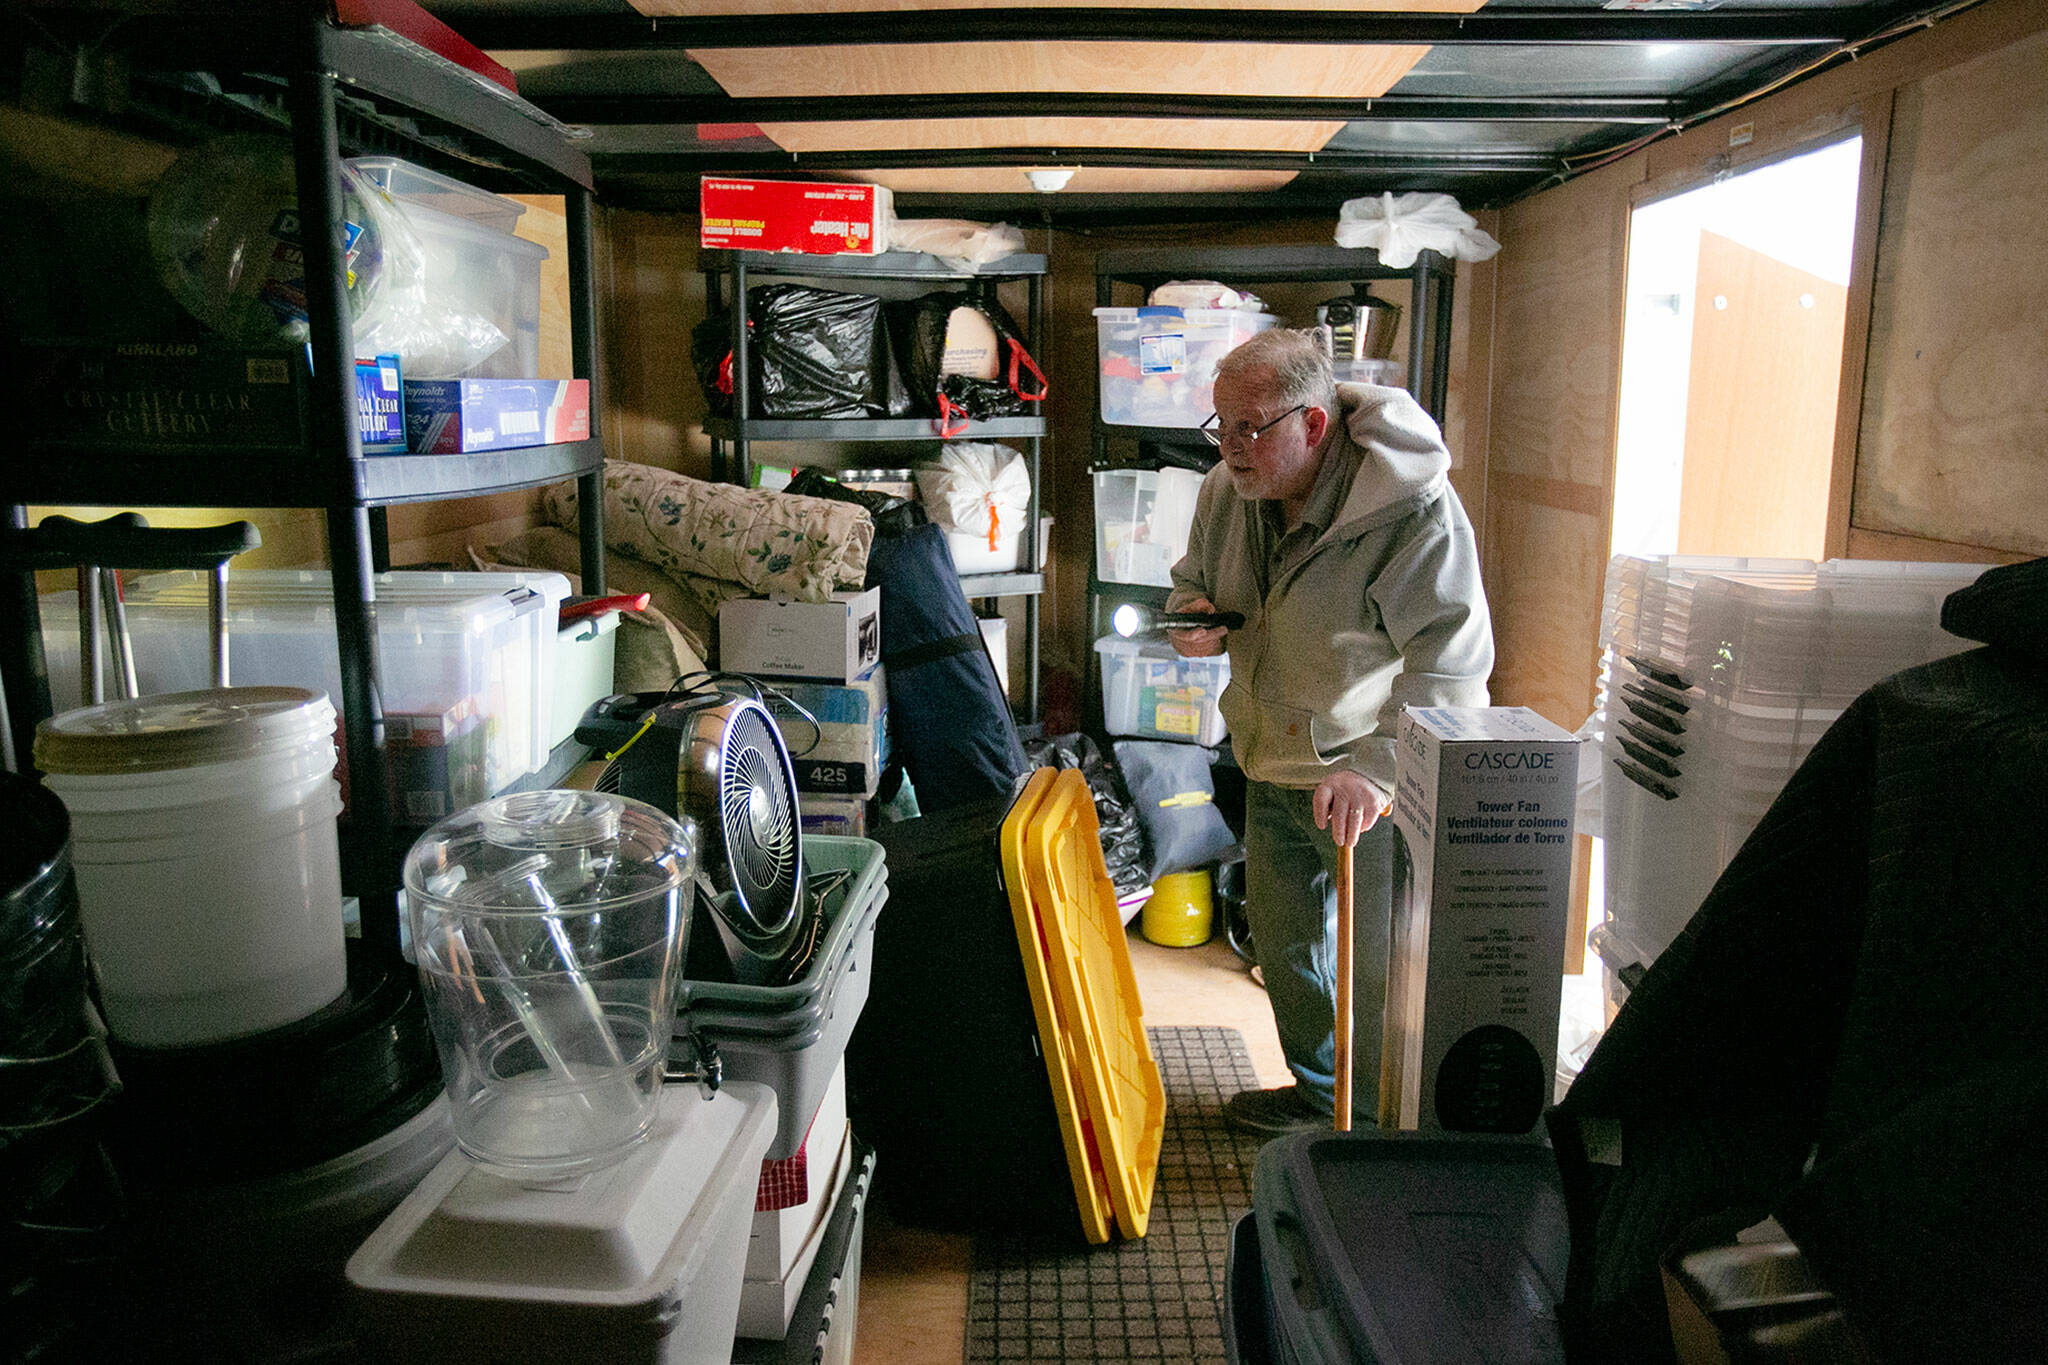 Ron Thompson looks around an outside trailer that he and his wife, Gail, keep stocked with emergency supplies at their home in Oso. The Thompsons lost their home to the 2014 Oso mudslide that claimed 43 lives, and in the years since, they have worked to prepare themselves and their community members for future disasters. (Ryan Berry / The Herald)